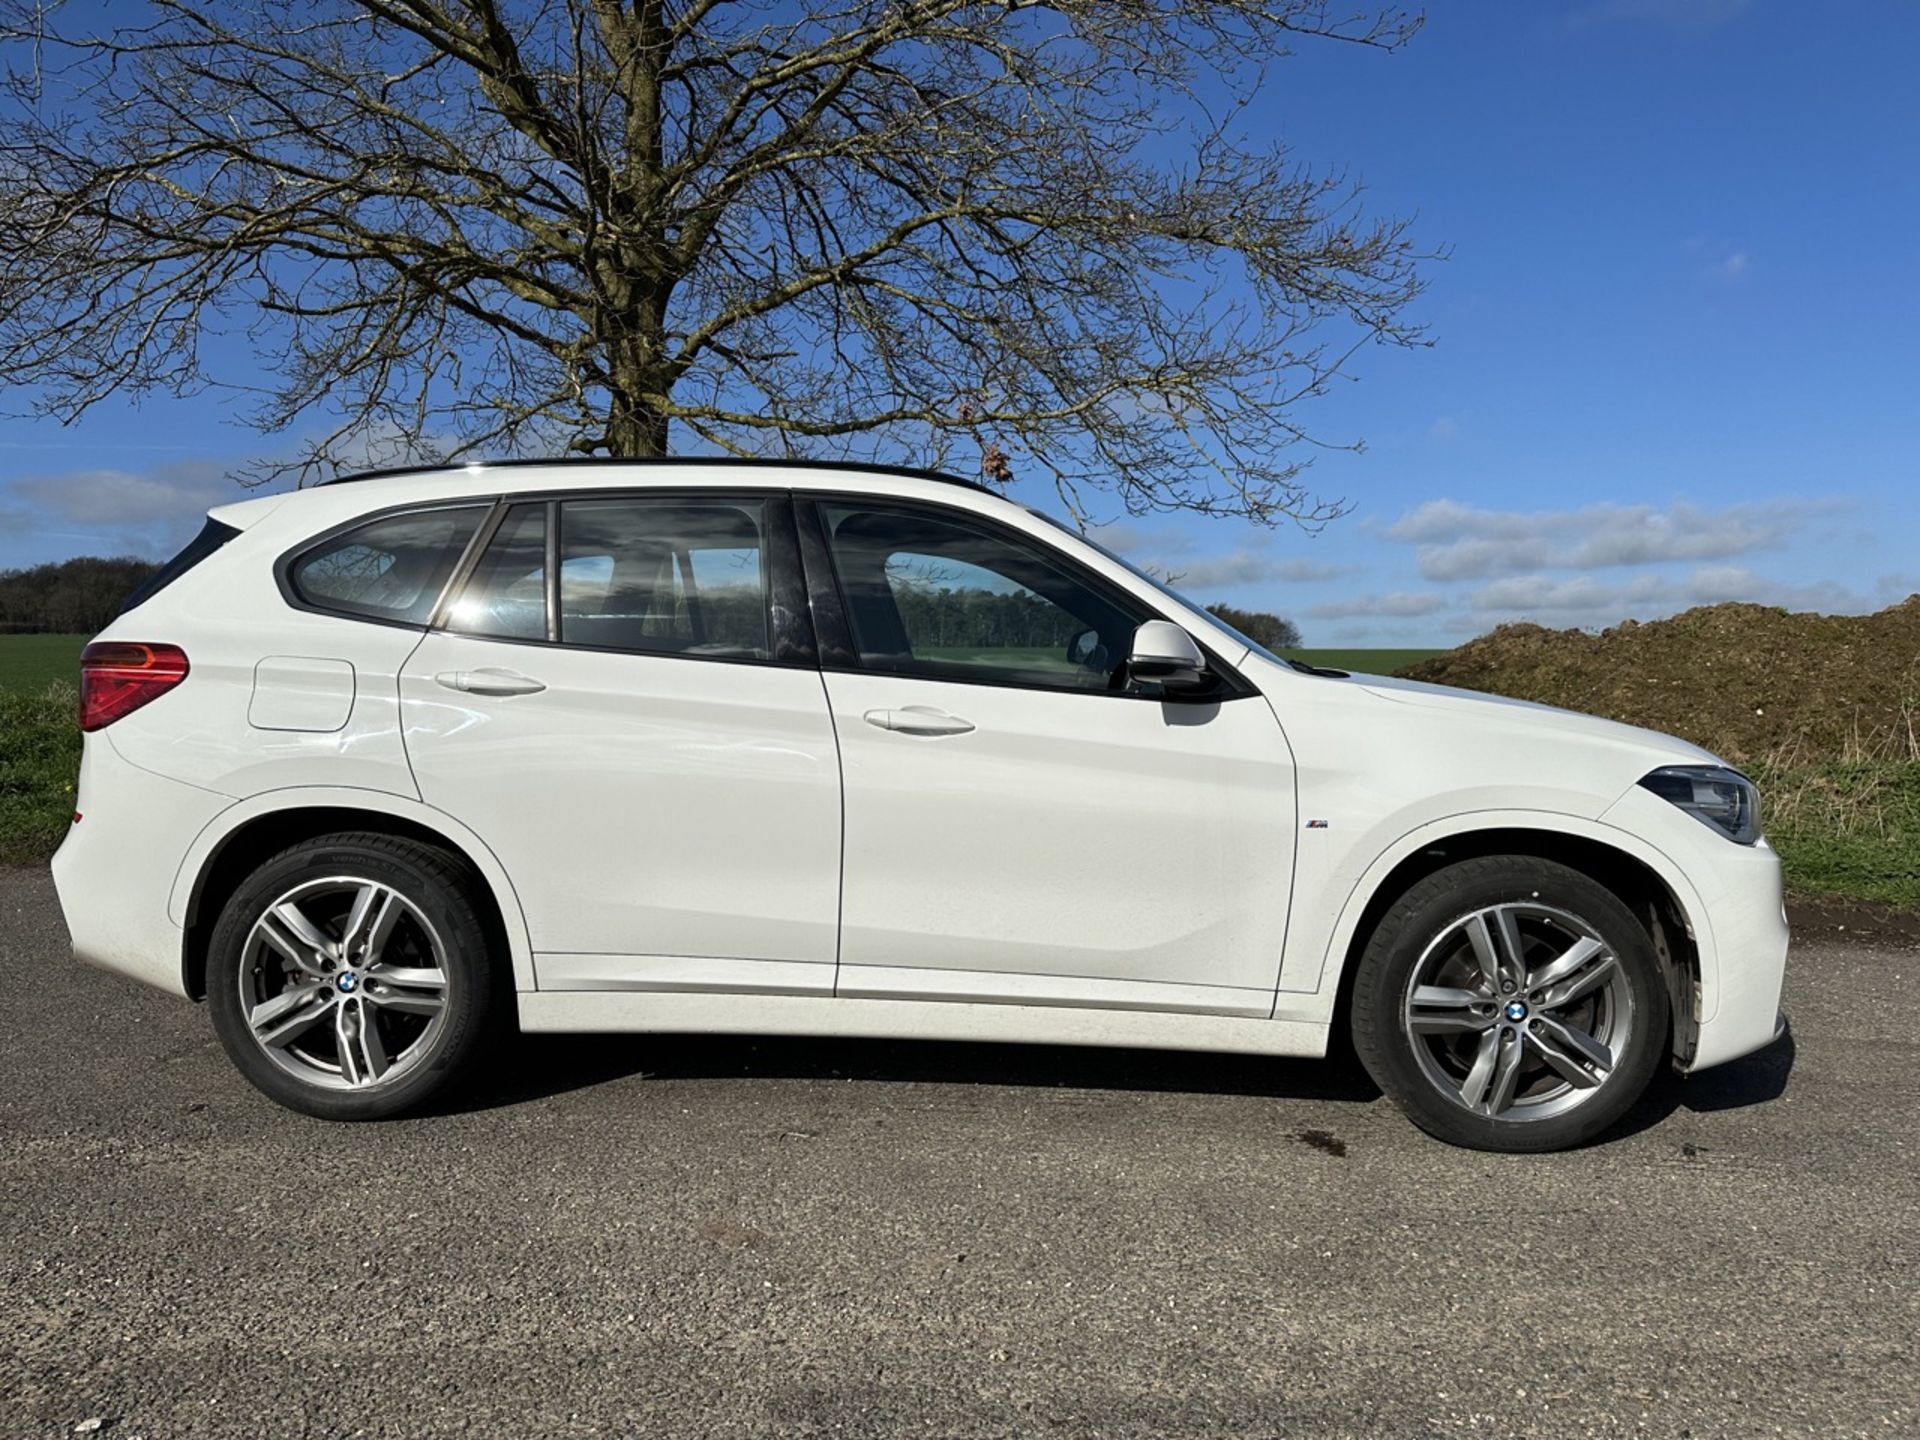 BMW X1 Xdrive20i M Sport Auto 20i - 2018 - 16.5k MILES ONLY - M SPORT Seats/badging - Image 4 of 22